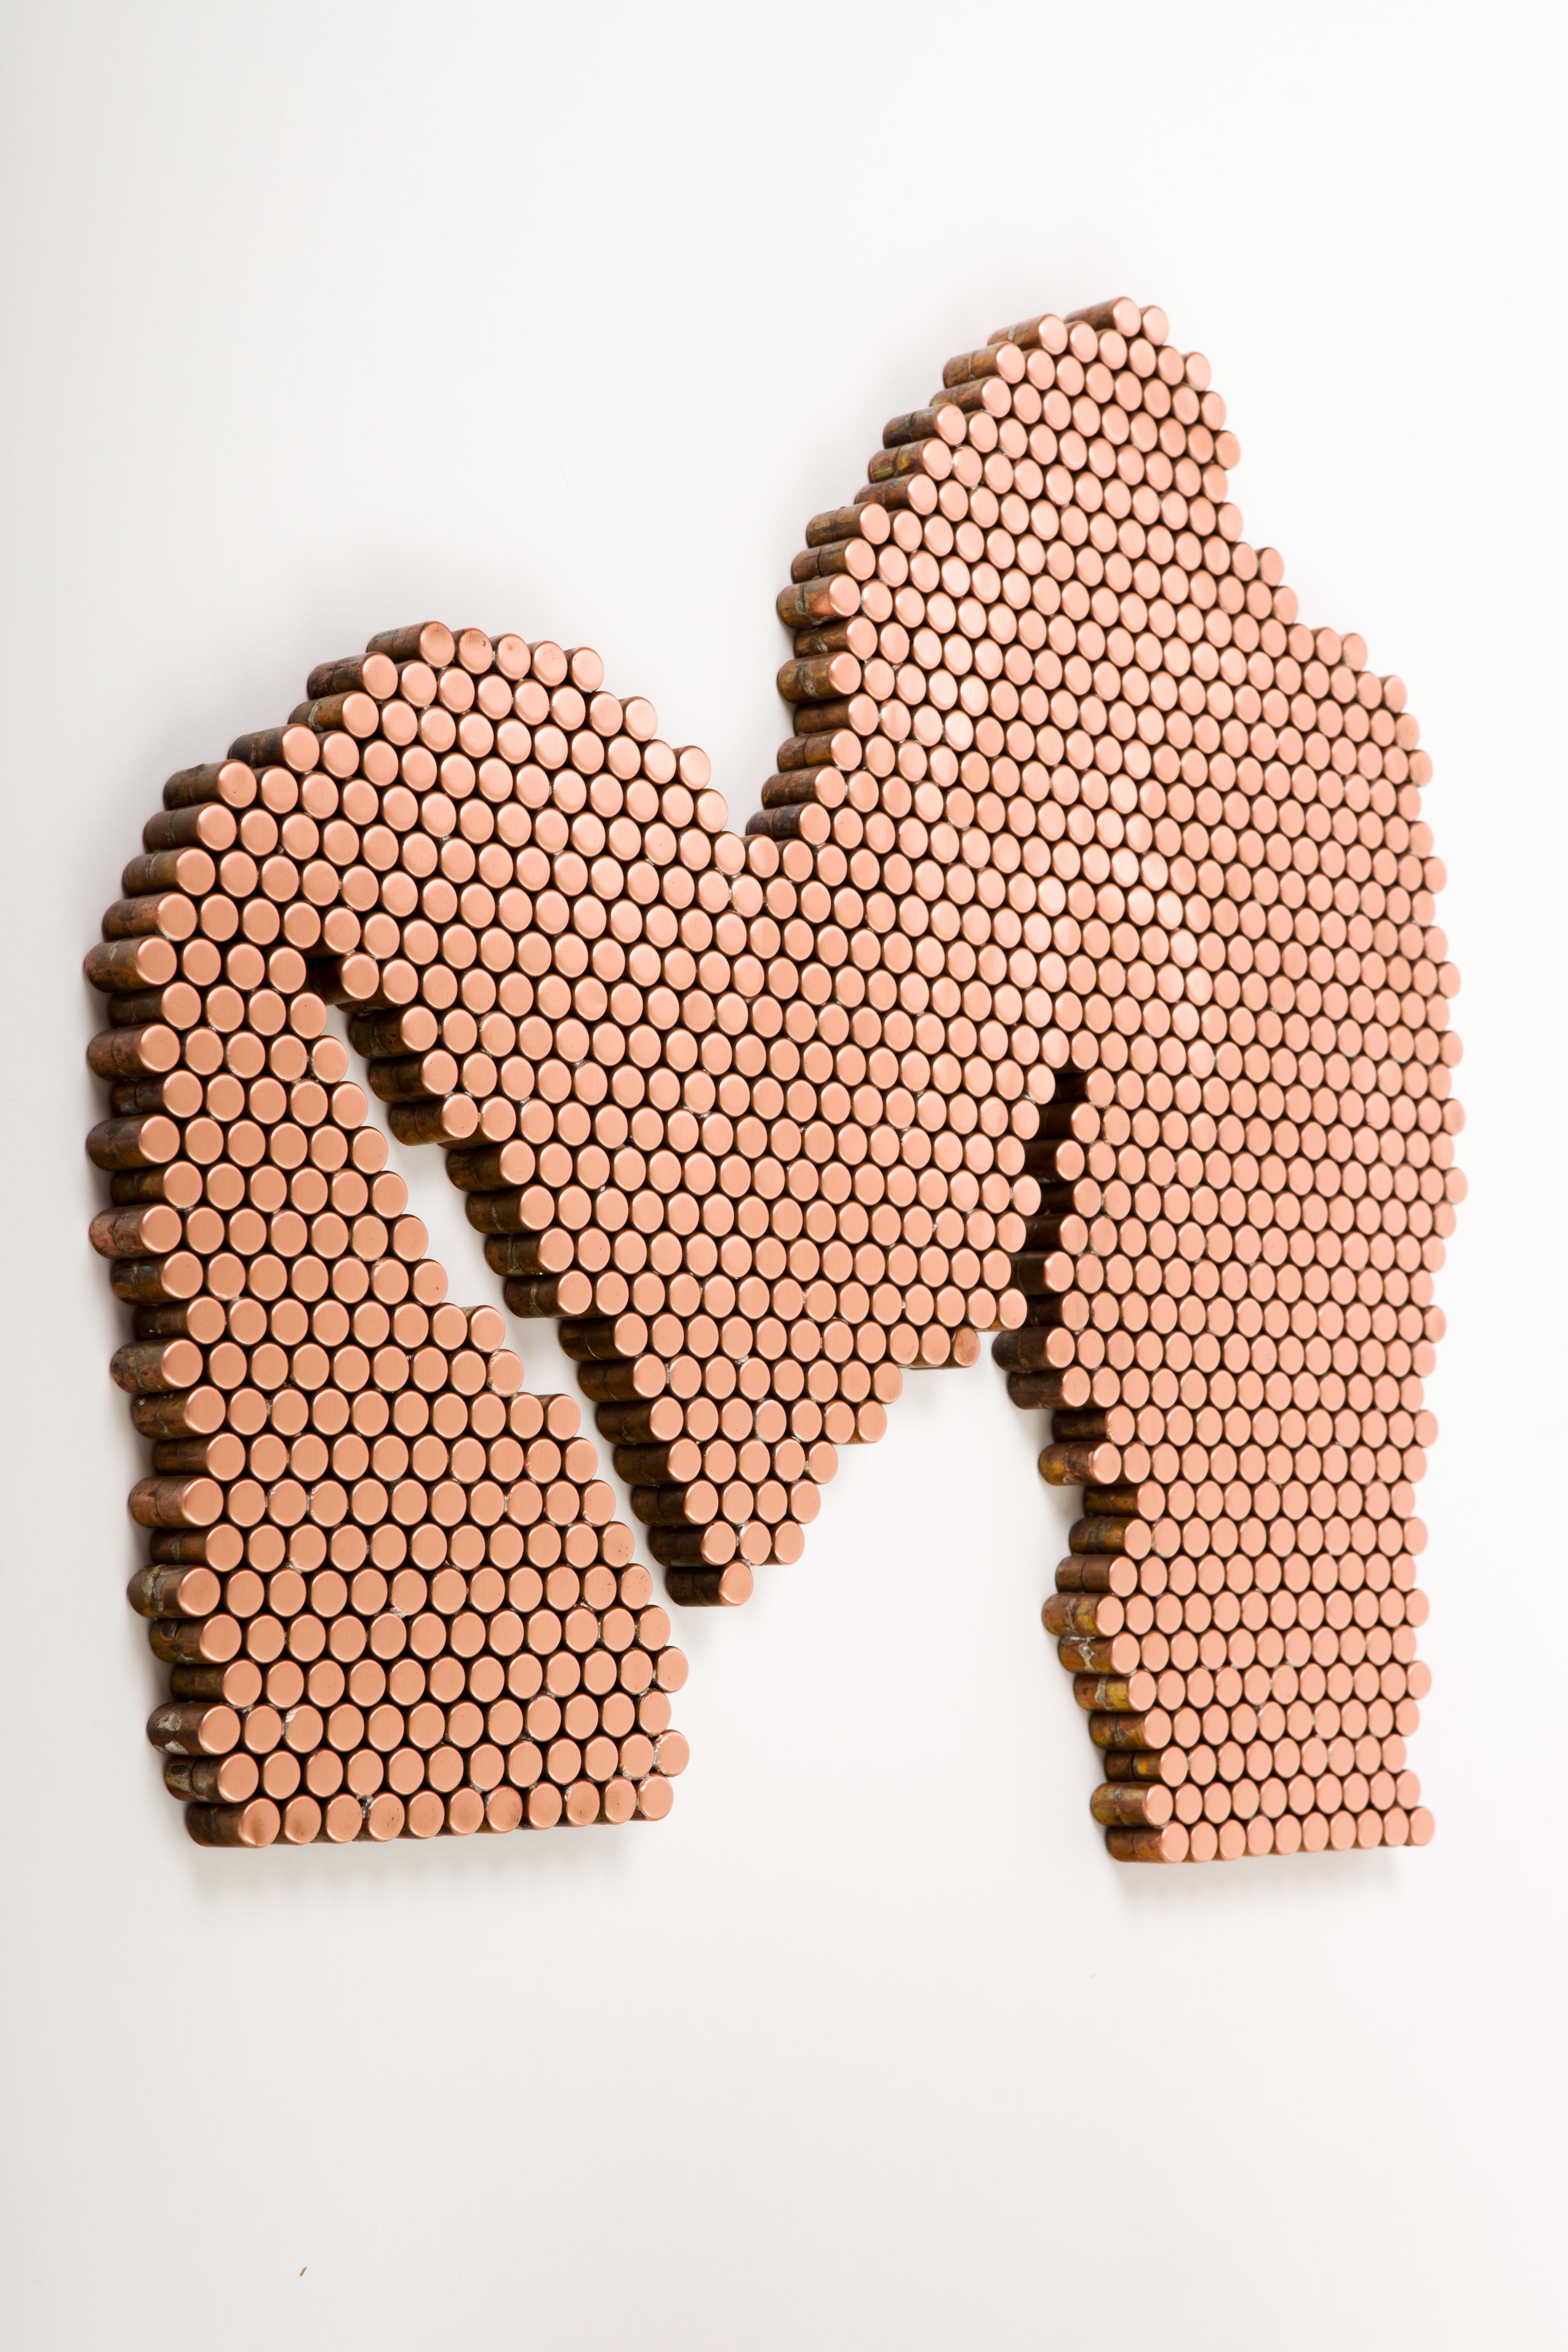 Title: Stump Speech, #4
Year: 2013

A to-scale rendering of the cross section of a tree discovered in Prospect Park, Brooklyn, comprising hundreds of circular copper components meticulously assembled and soldered together. The ‘pixelation’